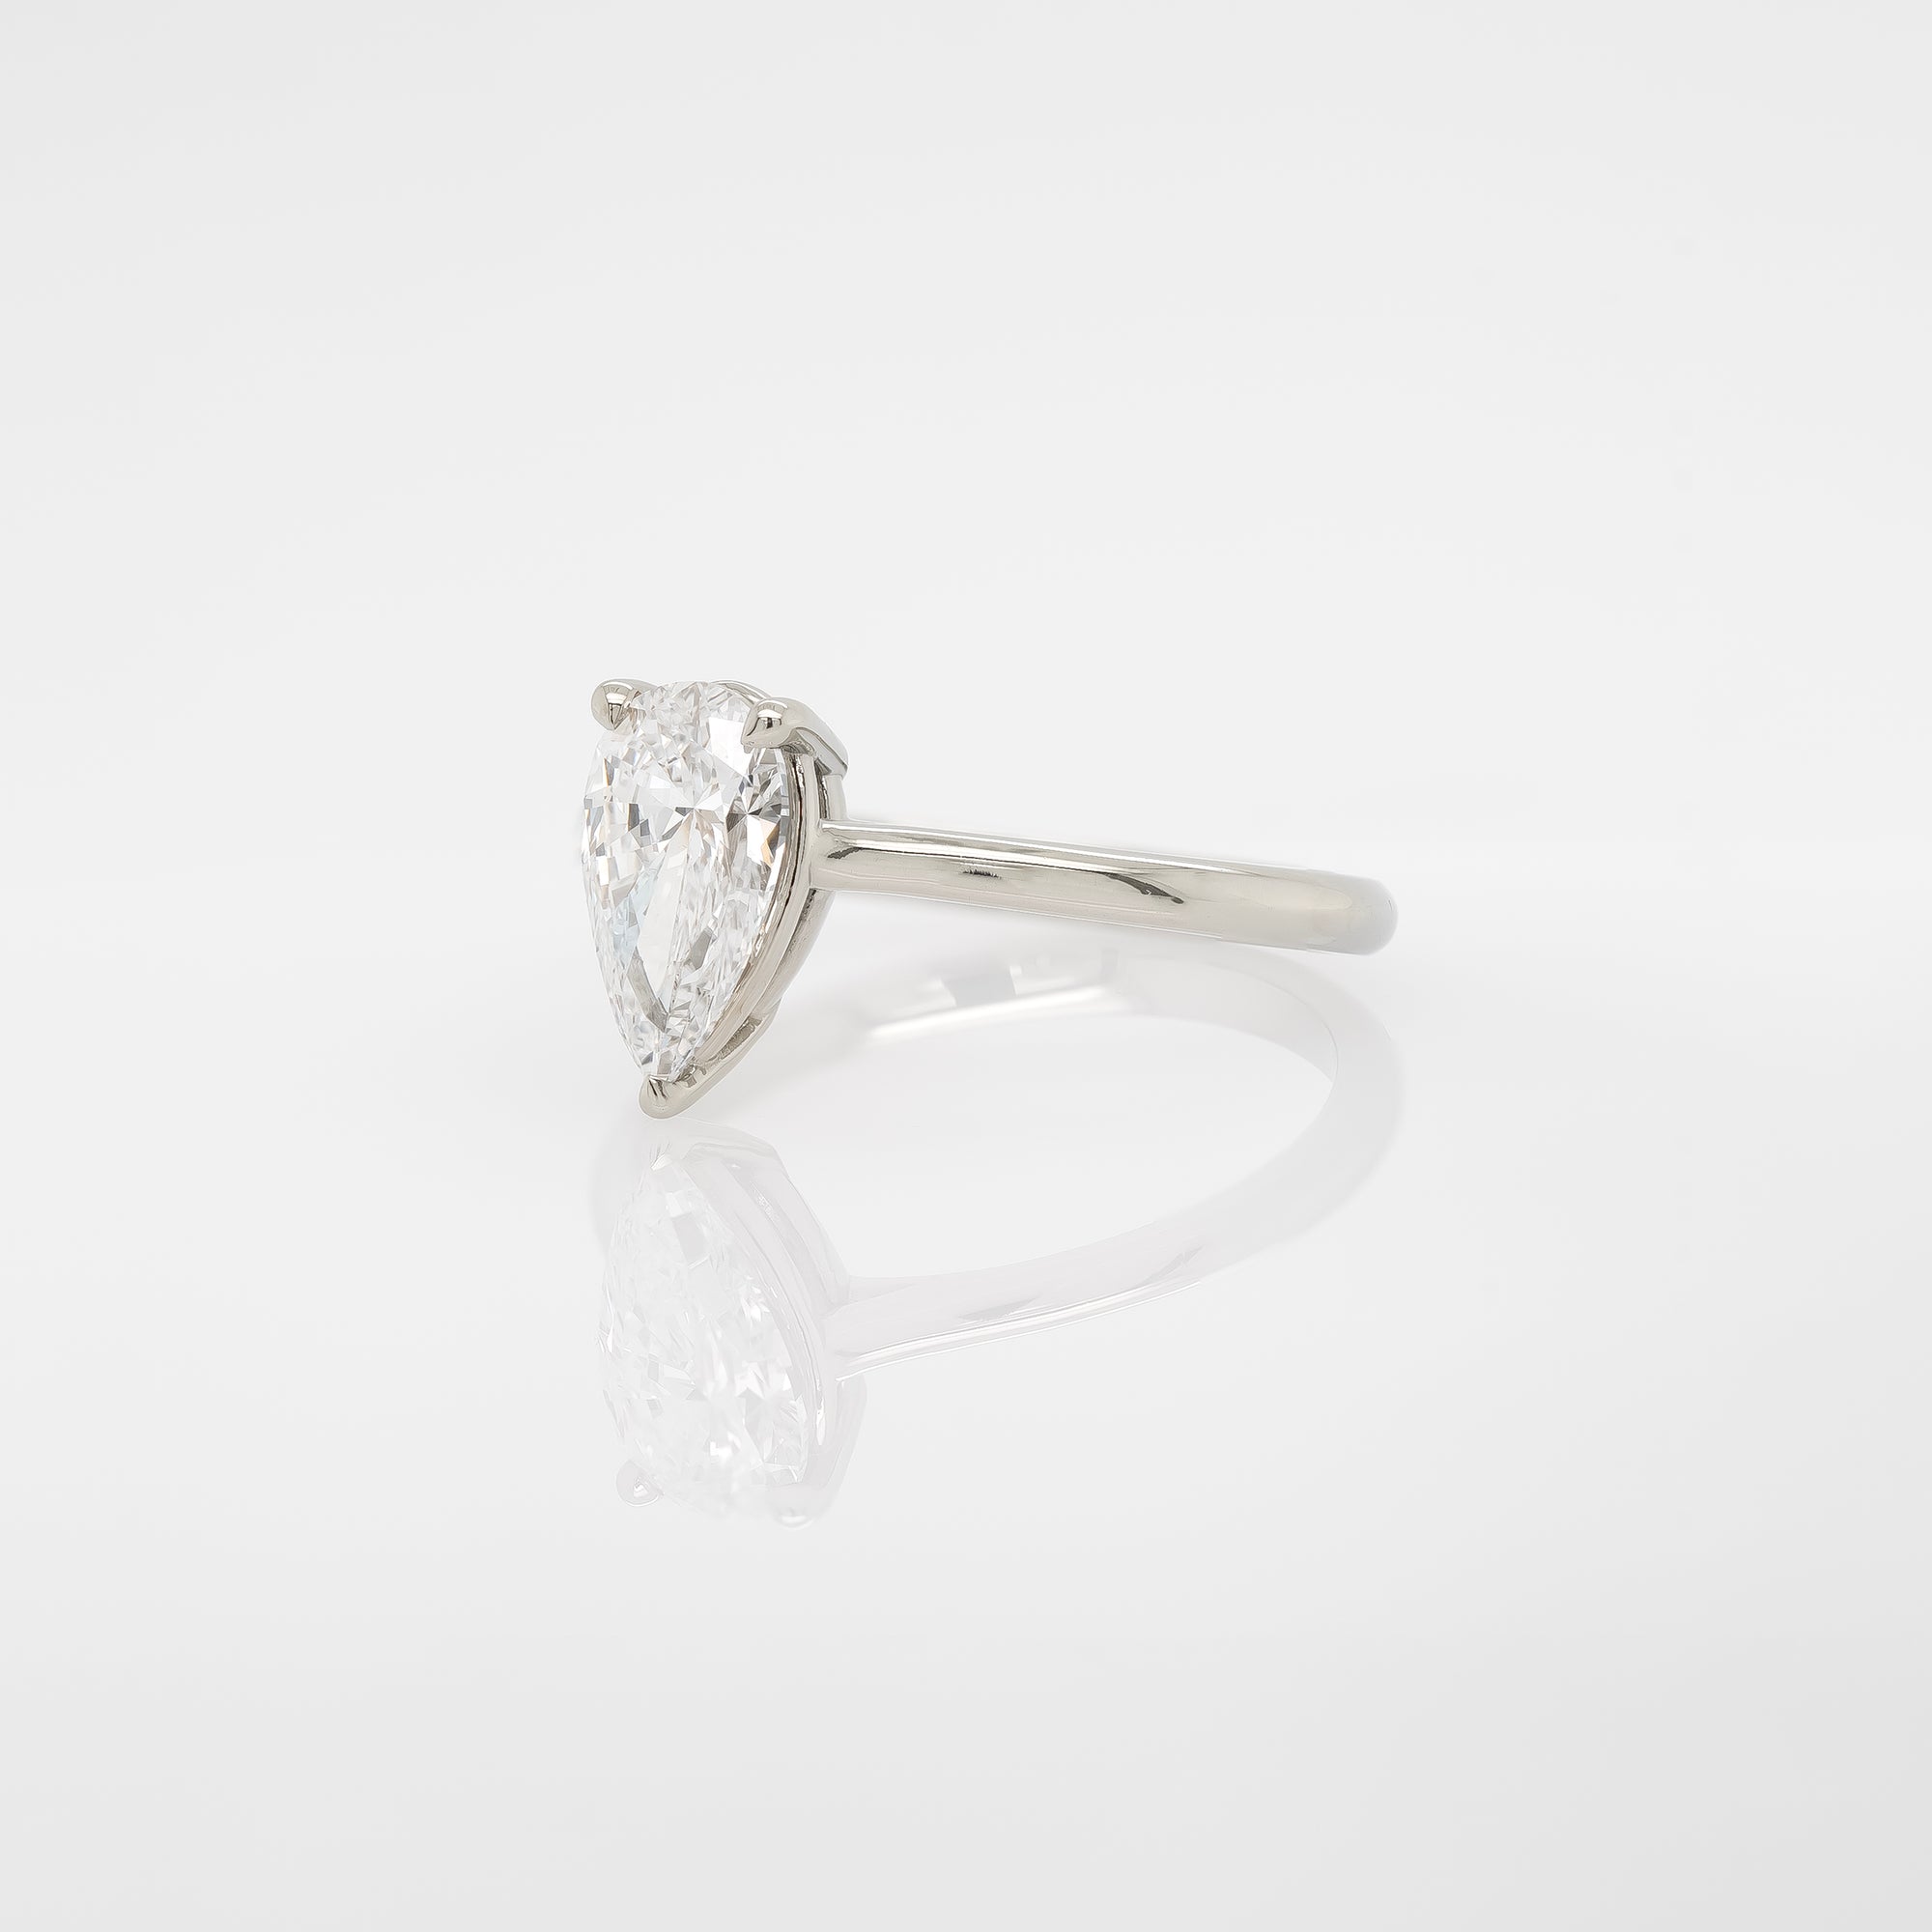 1.01ct Pear-Shaped Diamond Solitaire Engagement Ring